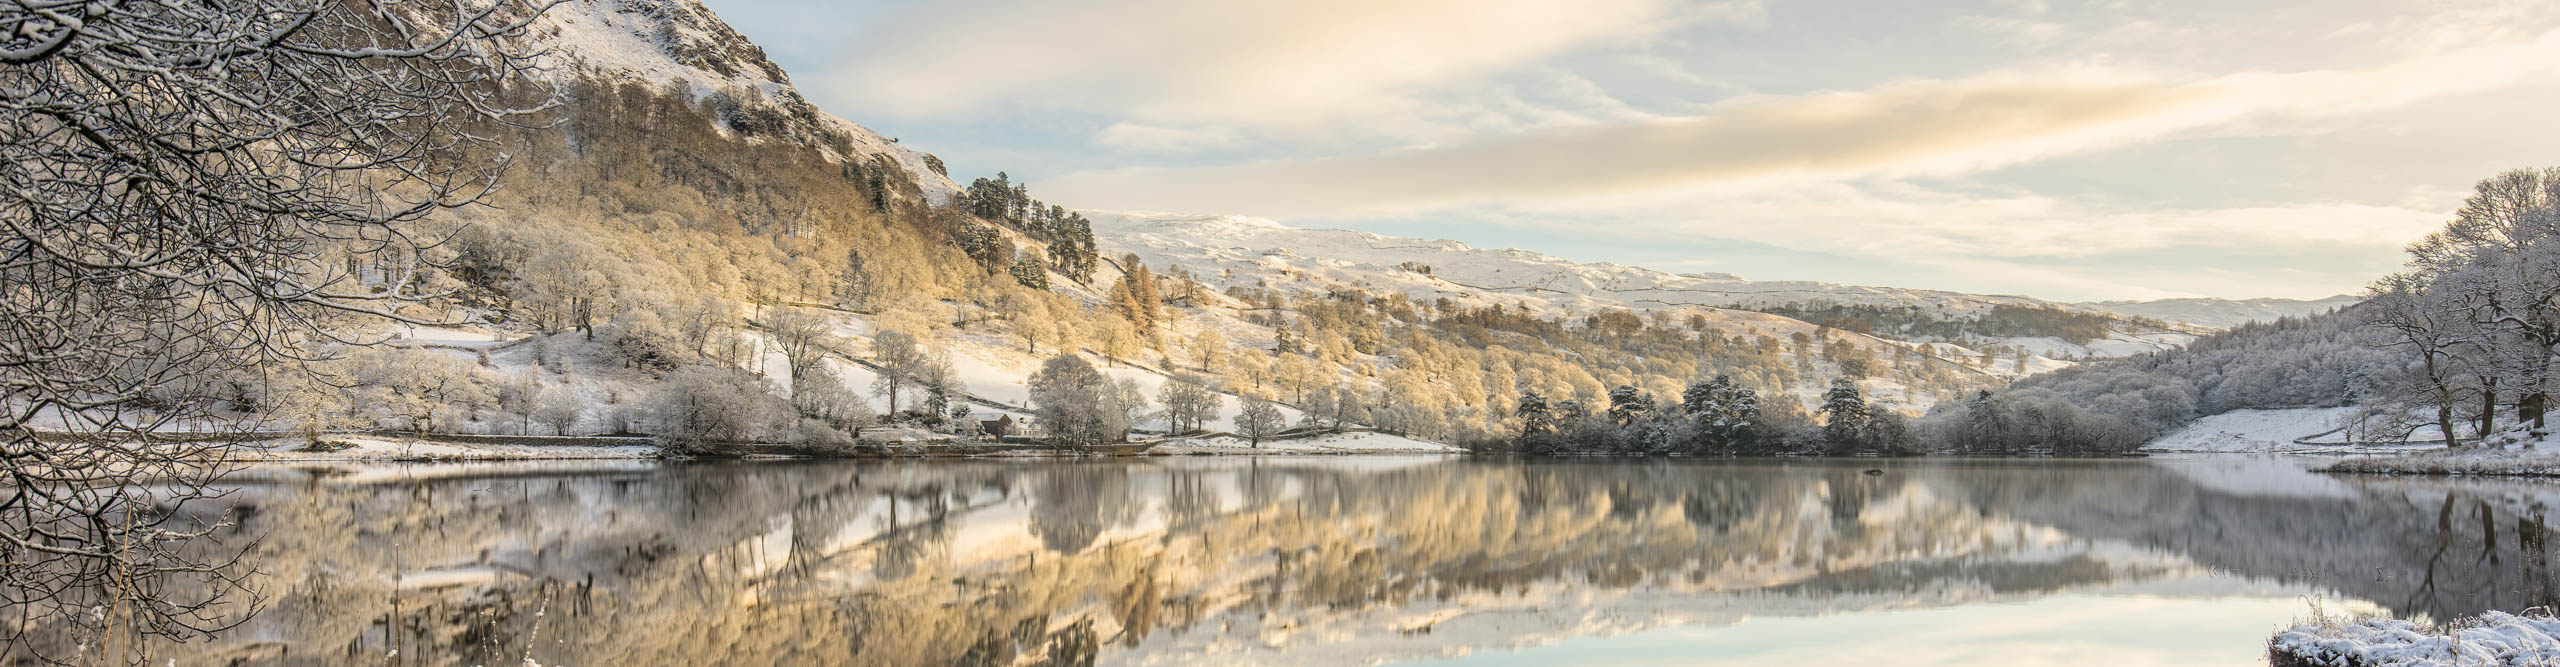 Winter morning at Rydal, in the English Lake District, with snow n the trees and hills 